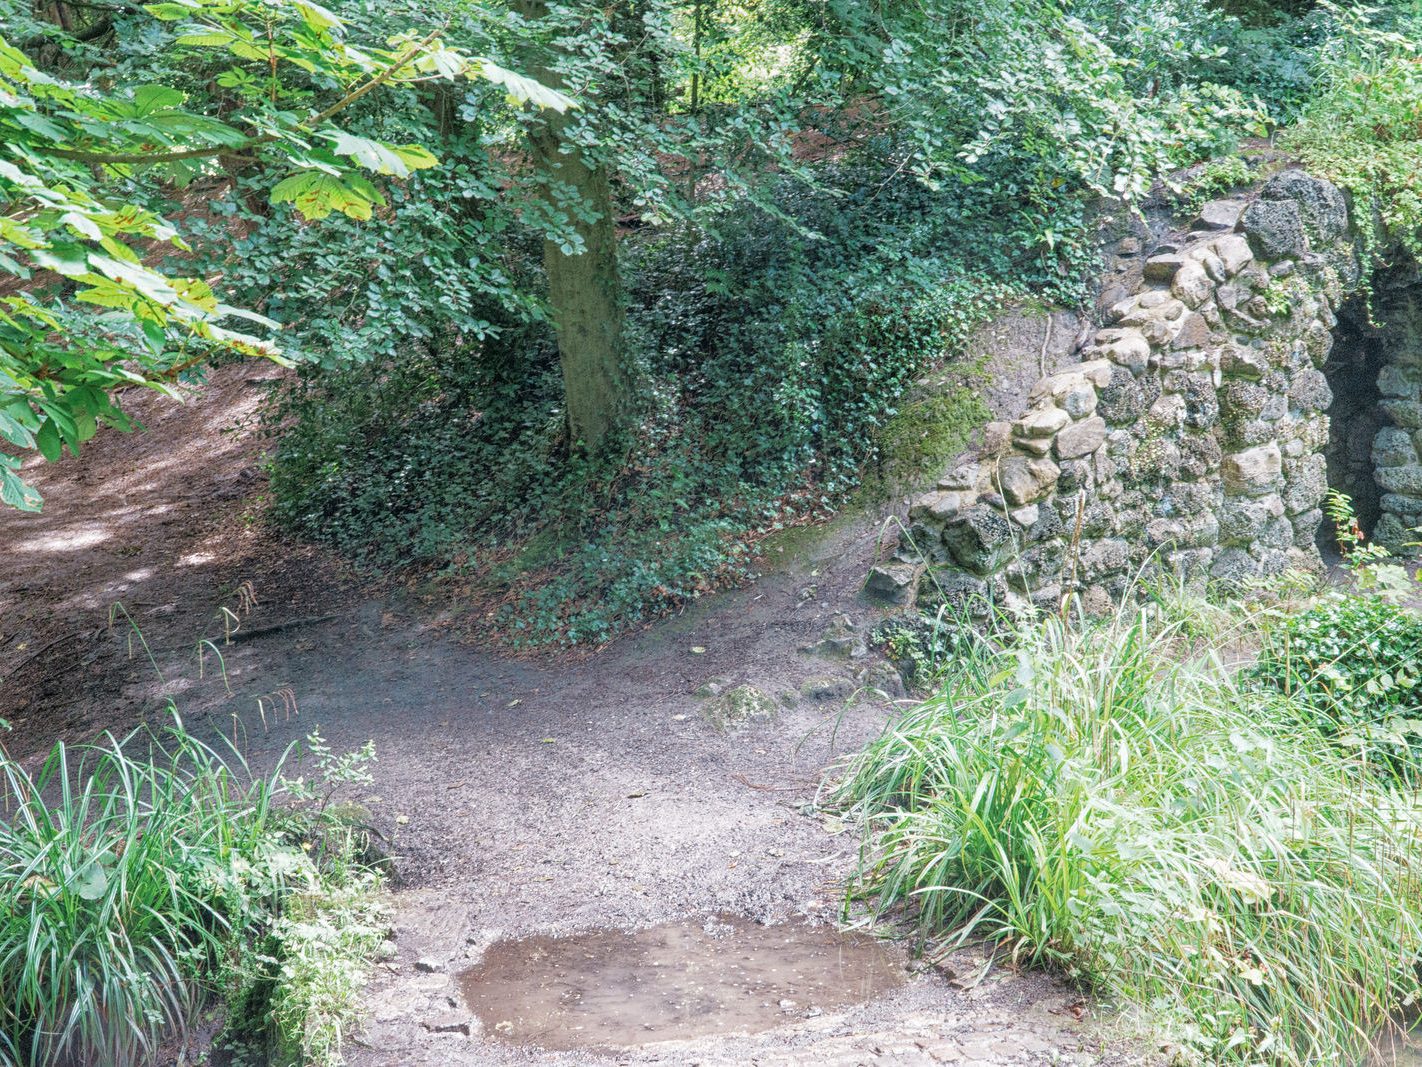 THE HERMIT'S CAVE AND NEARBY [ST ANNE'S PARK IN RAHENY] 009